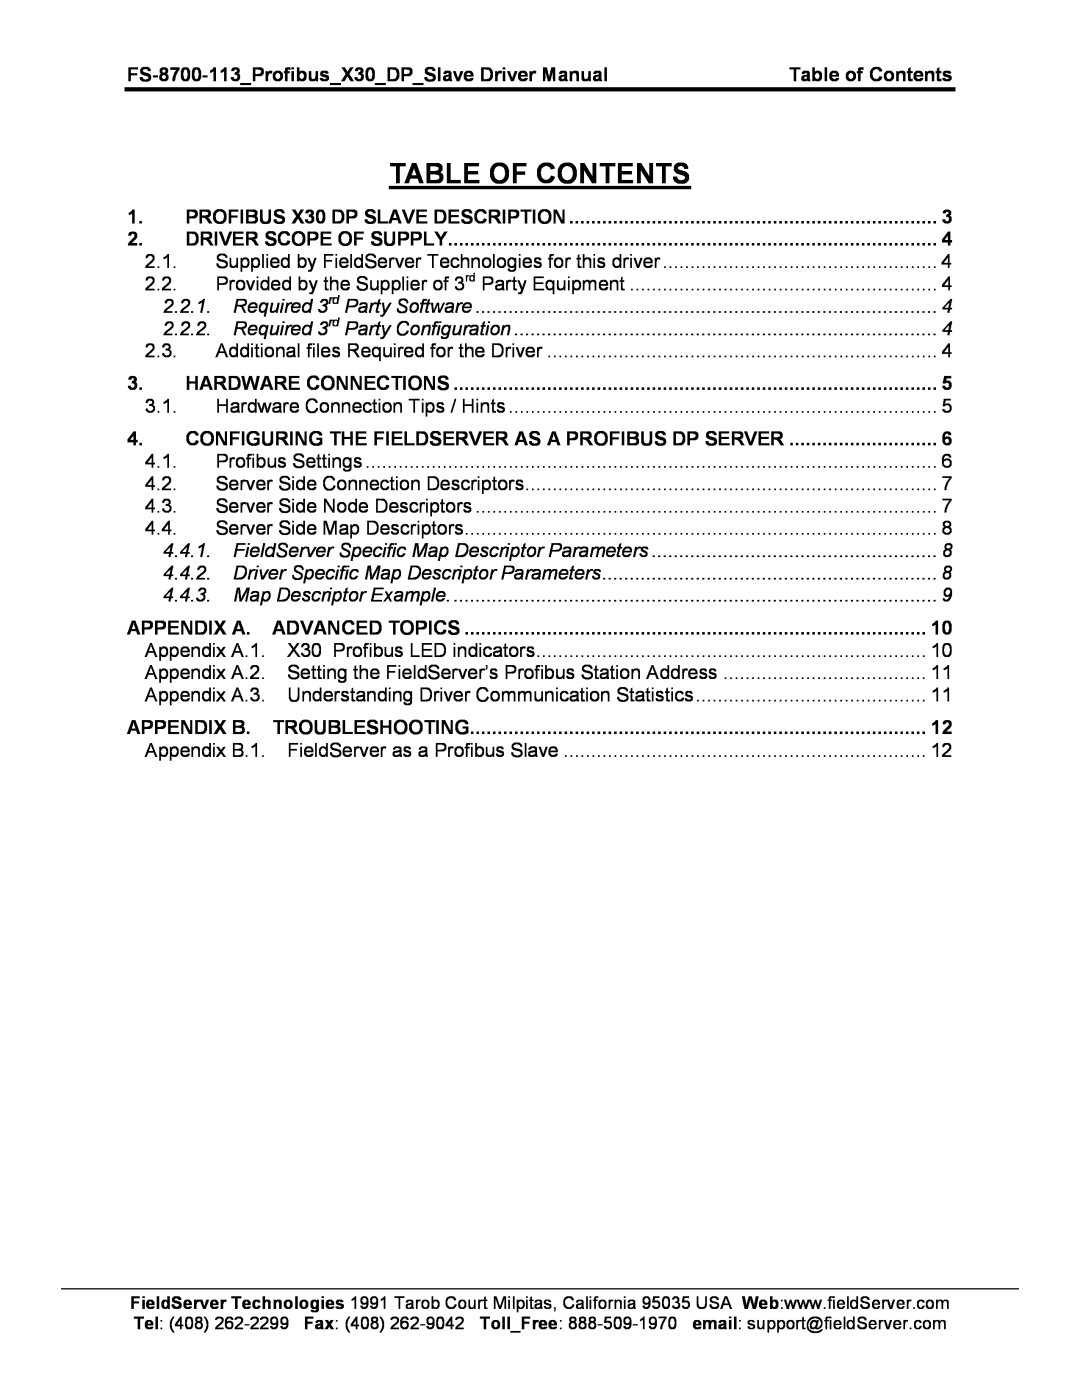 FieldServer FS-8700-113 instruction manual Table Of Contents 